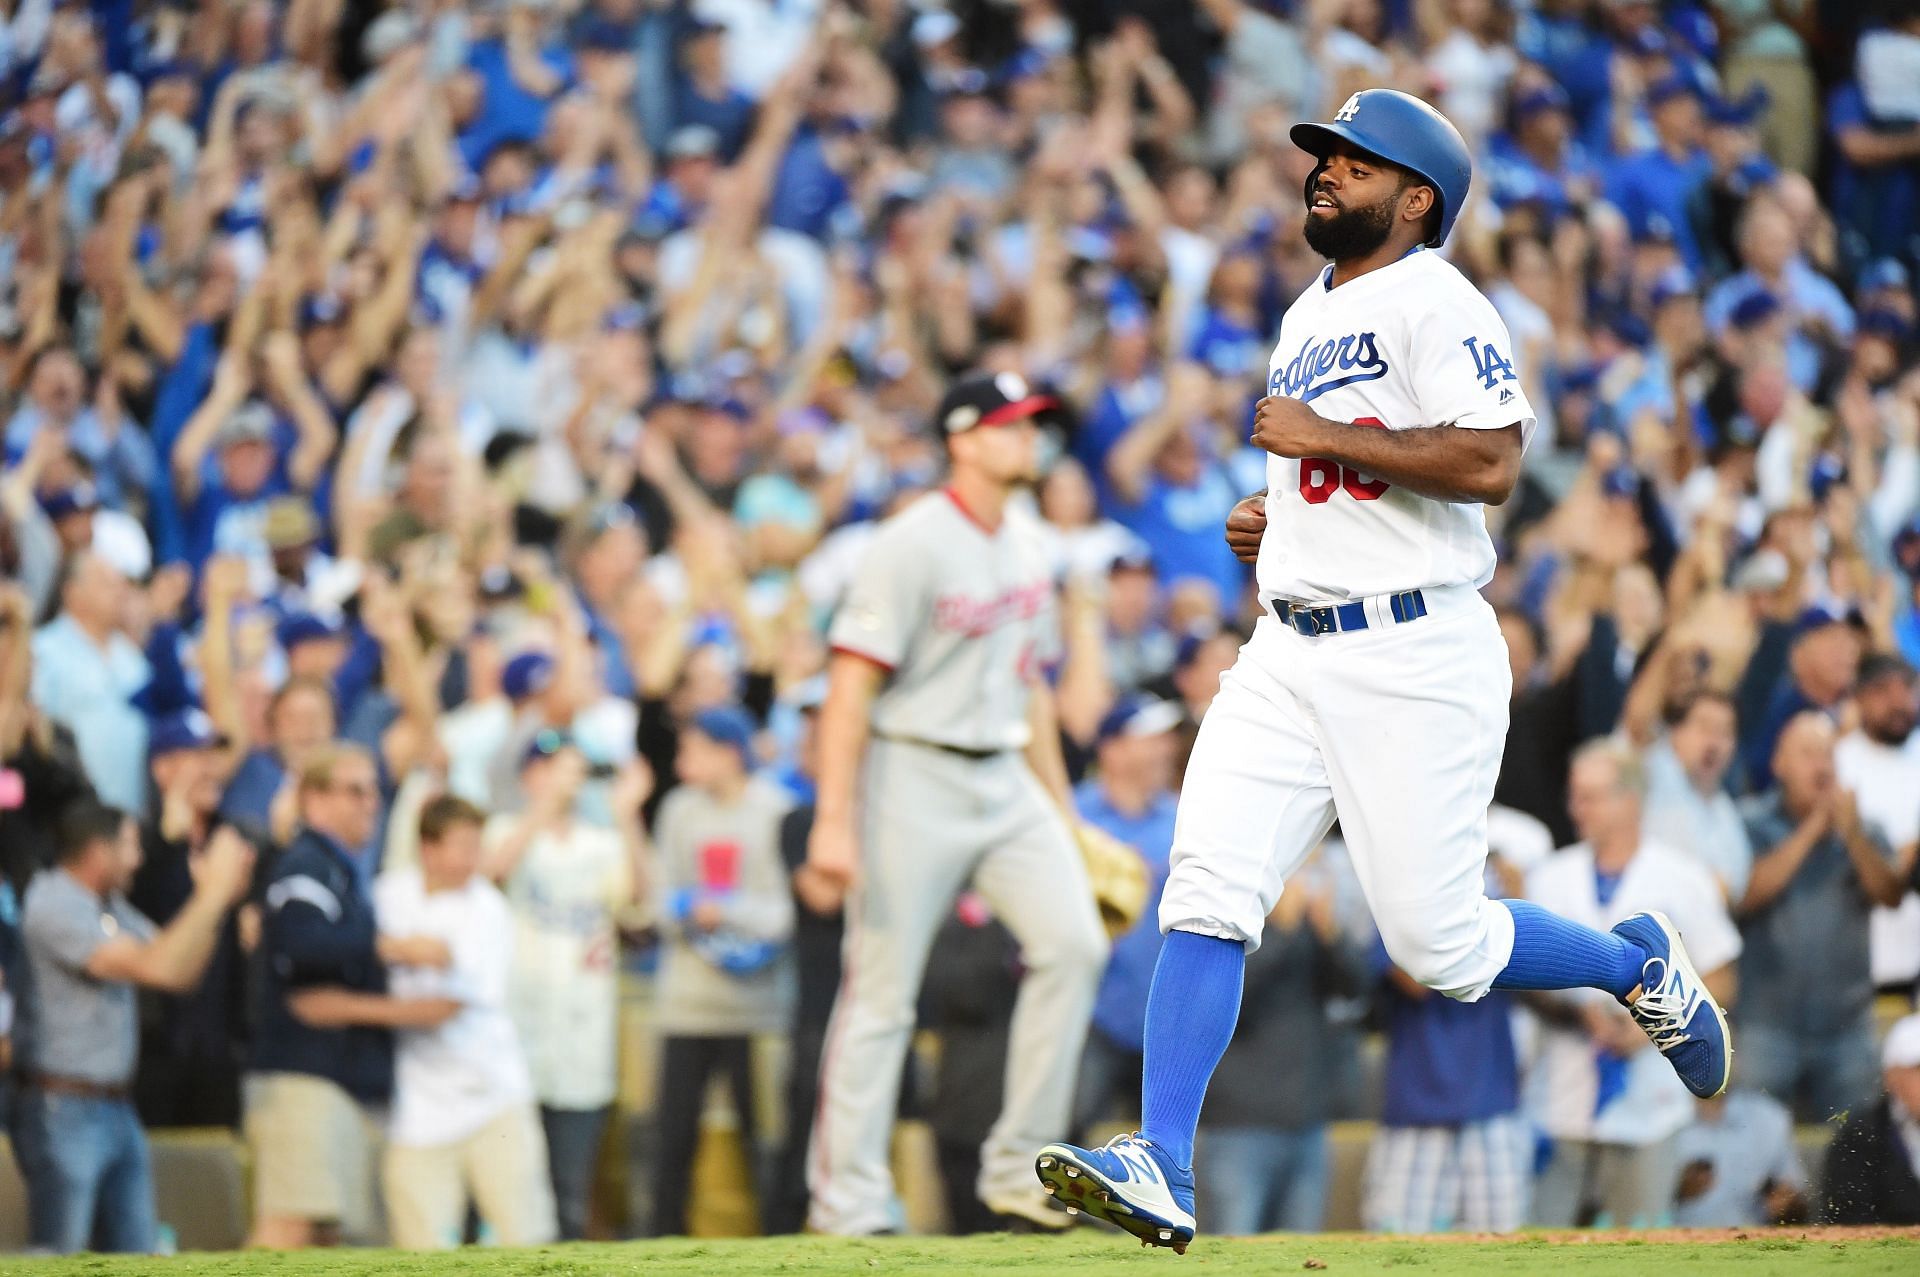 Dodgers renew Andrew Toles' contract so he can have health